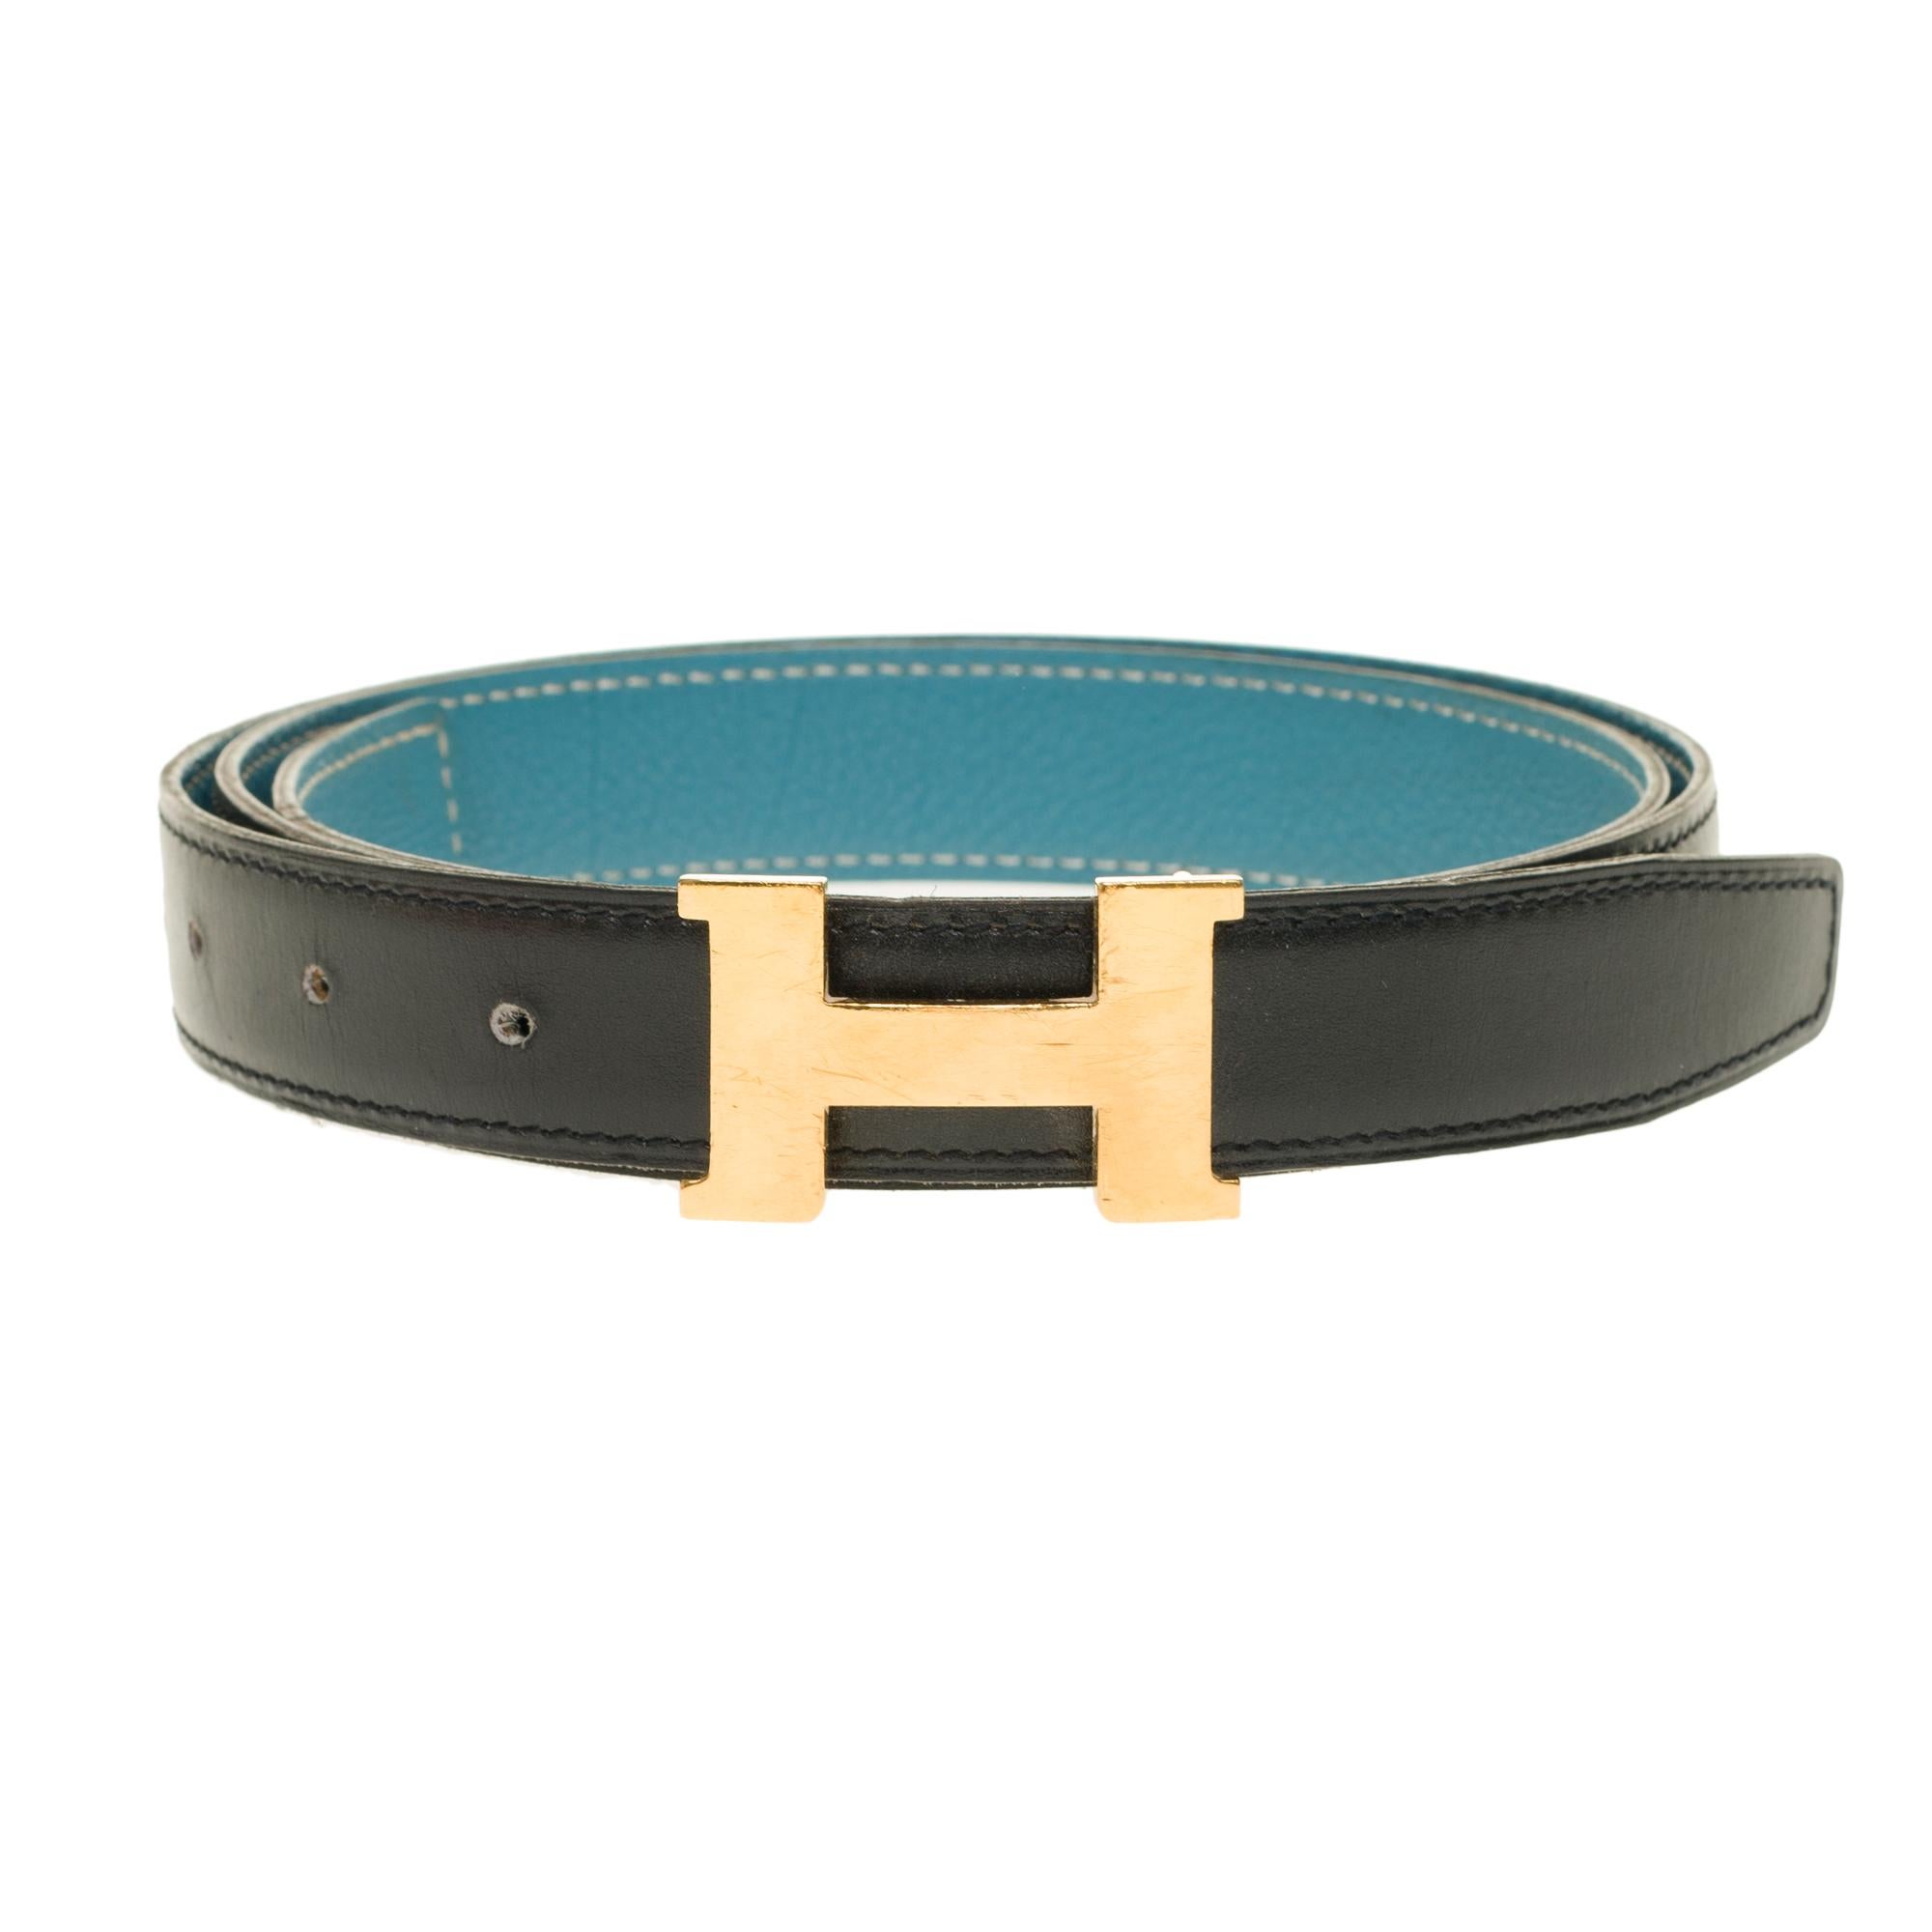 Hermès Reverse women’s belt in black and blue denim leather.
H buckle in gold-plated metal.
Signature: 